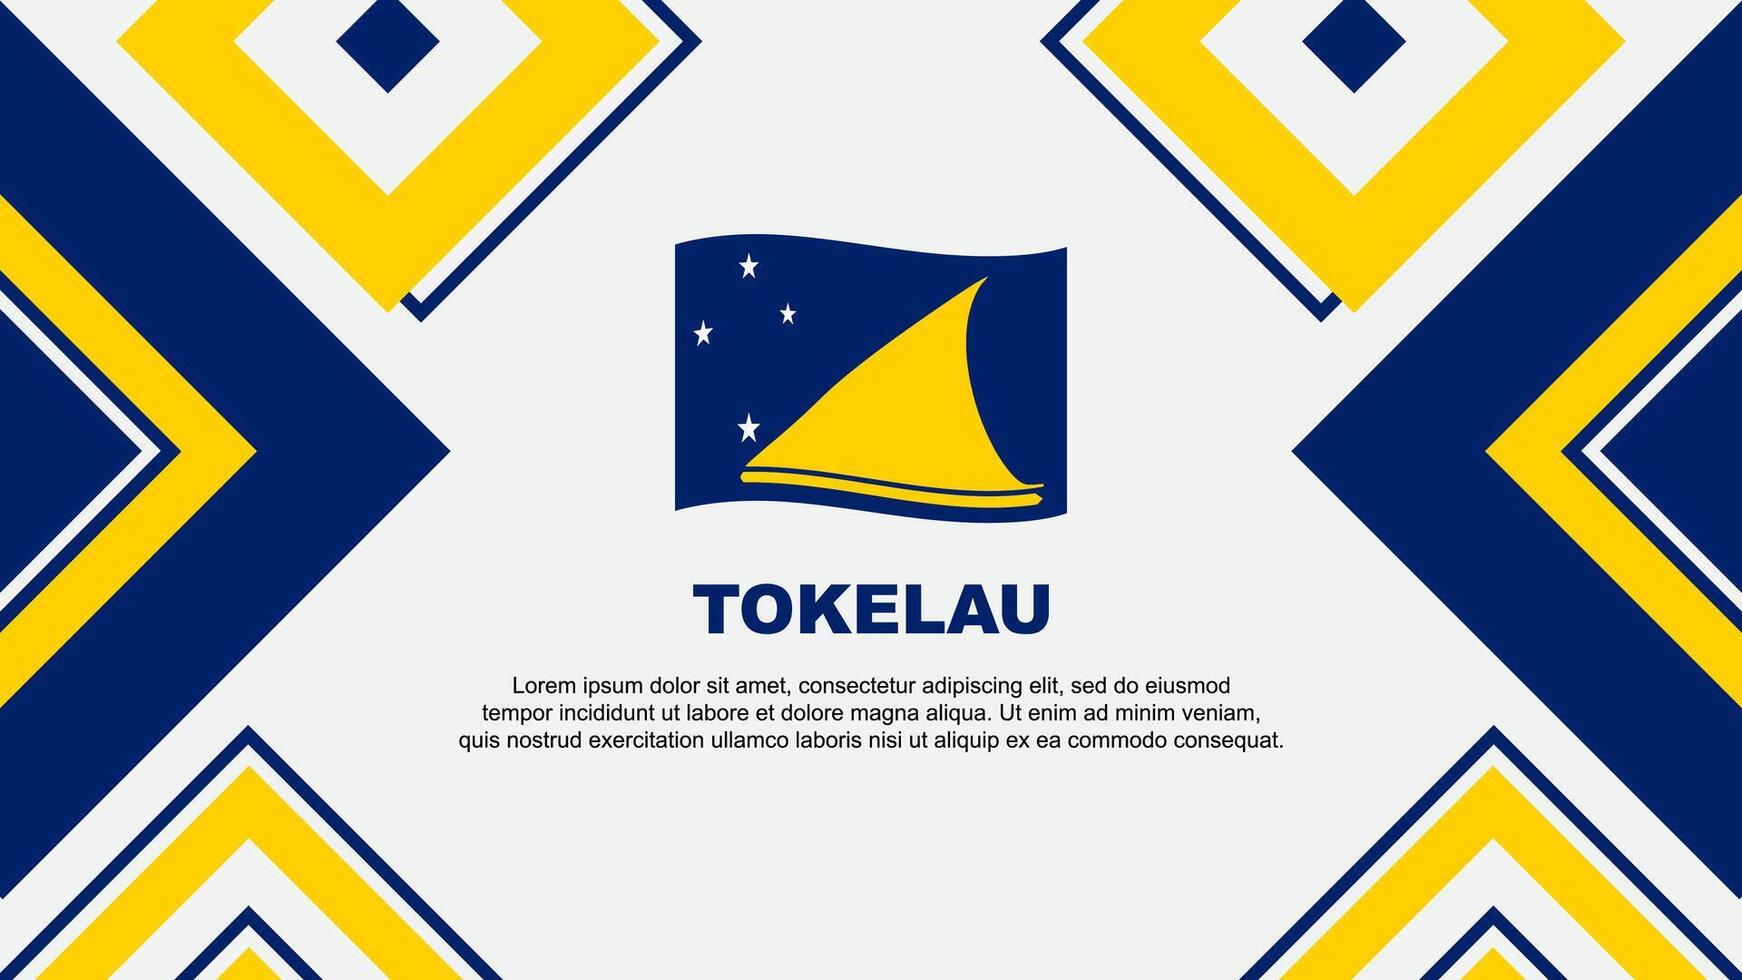 Tokelau Flag Abstract Background Design Template. Tokelau Independence Day Banner Wallpaper Vector Illustration. Tokelau Independence Day